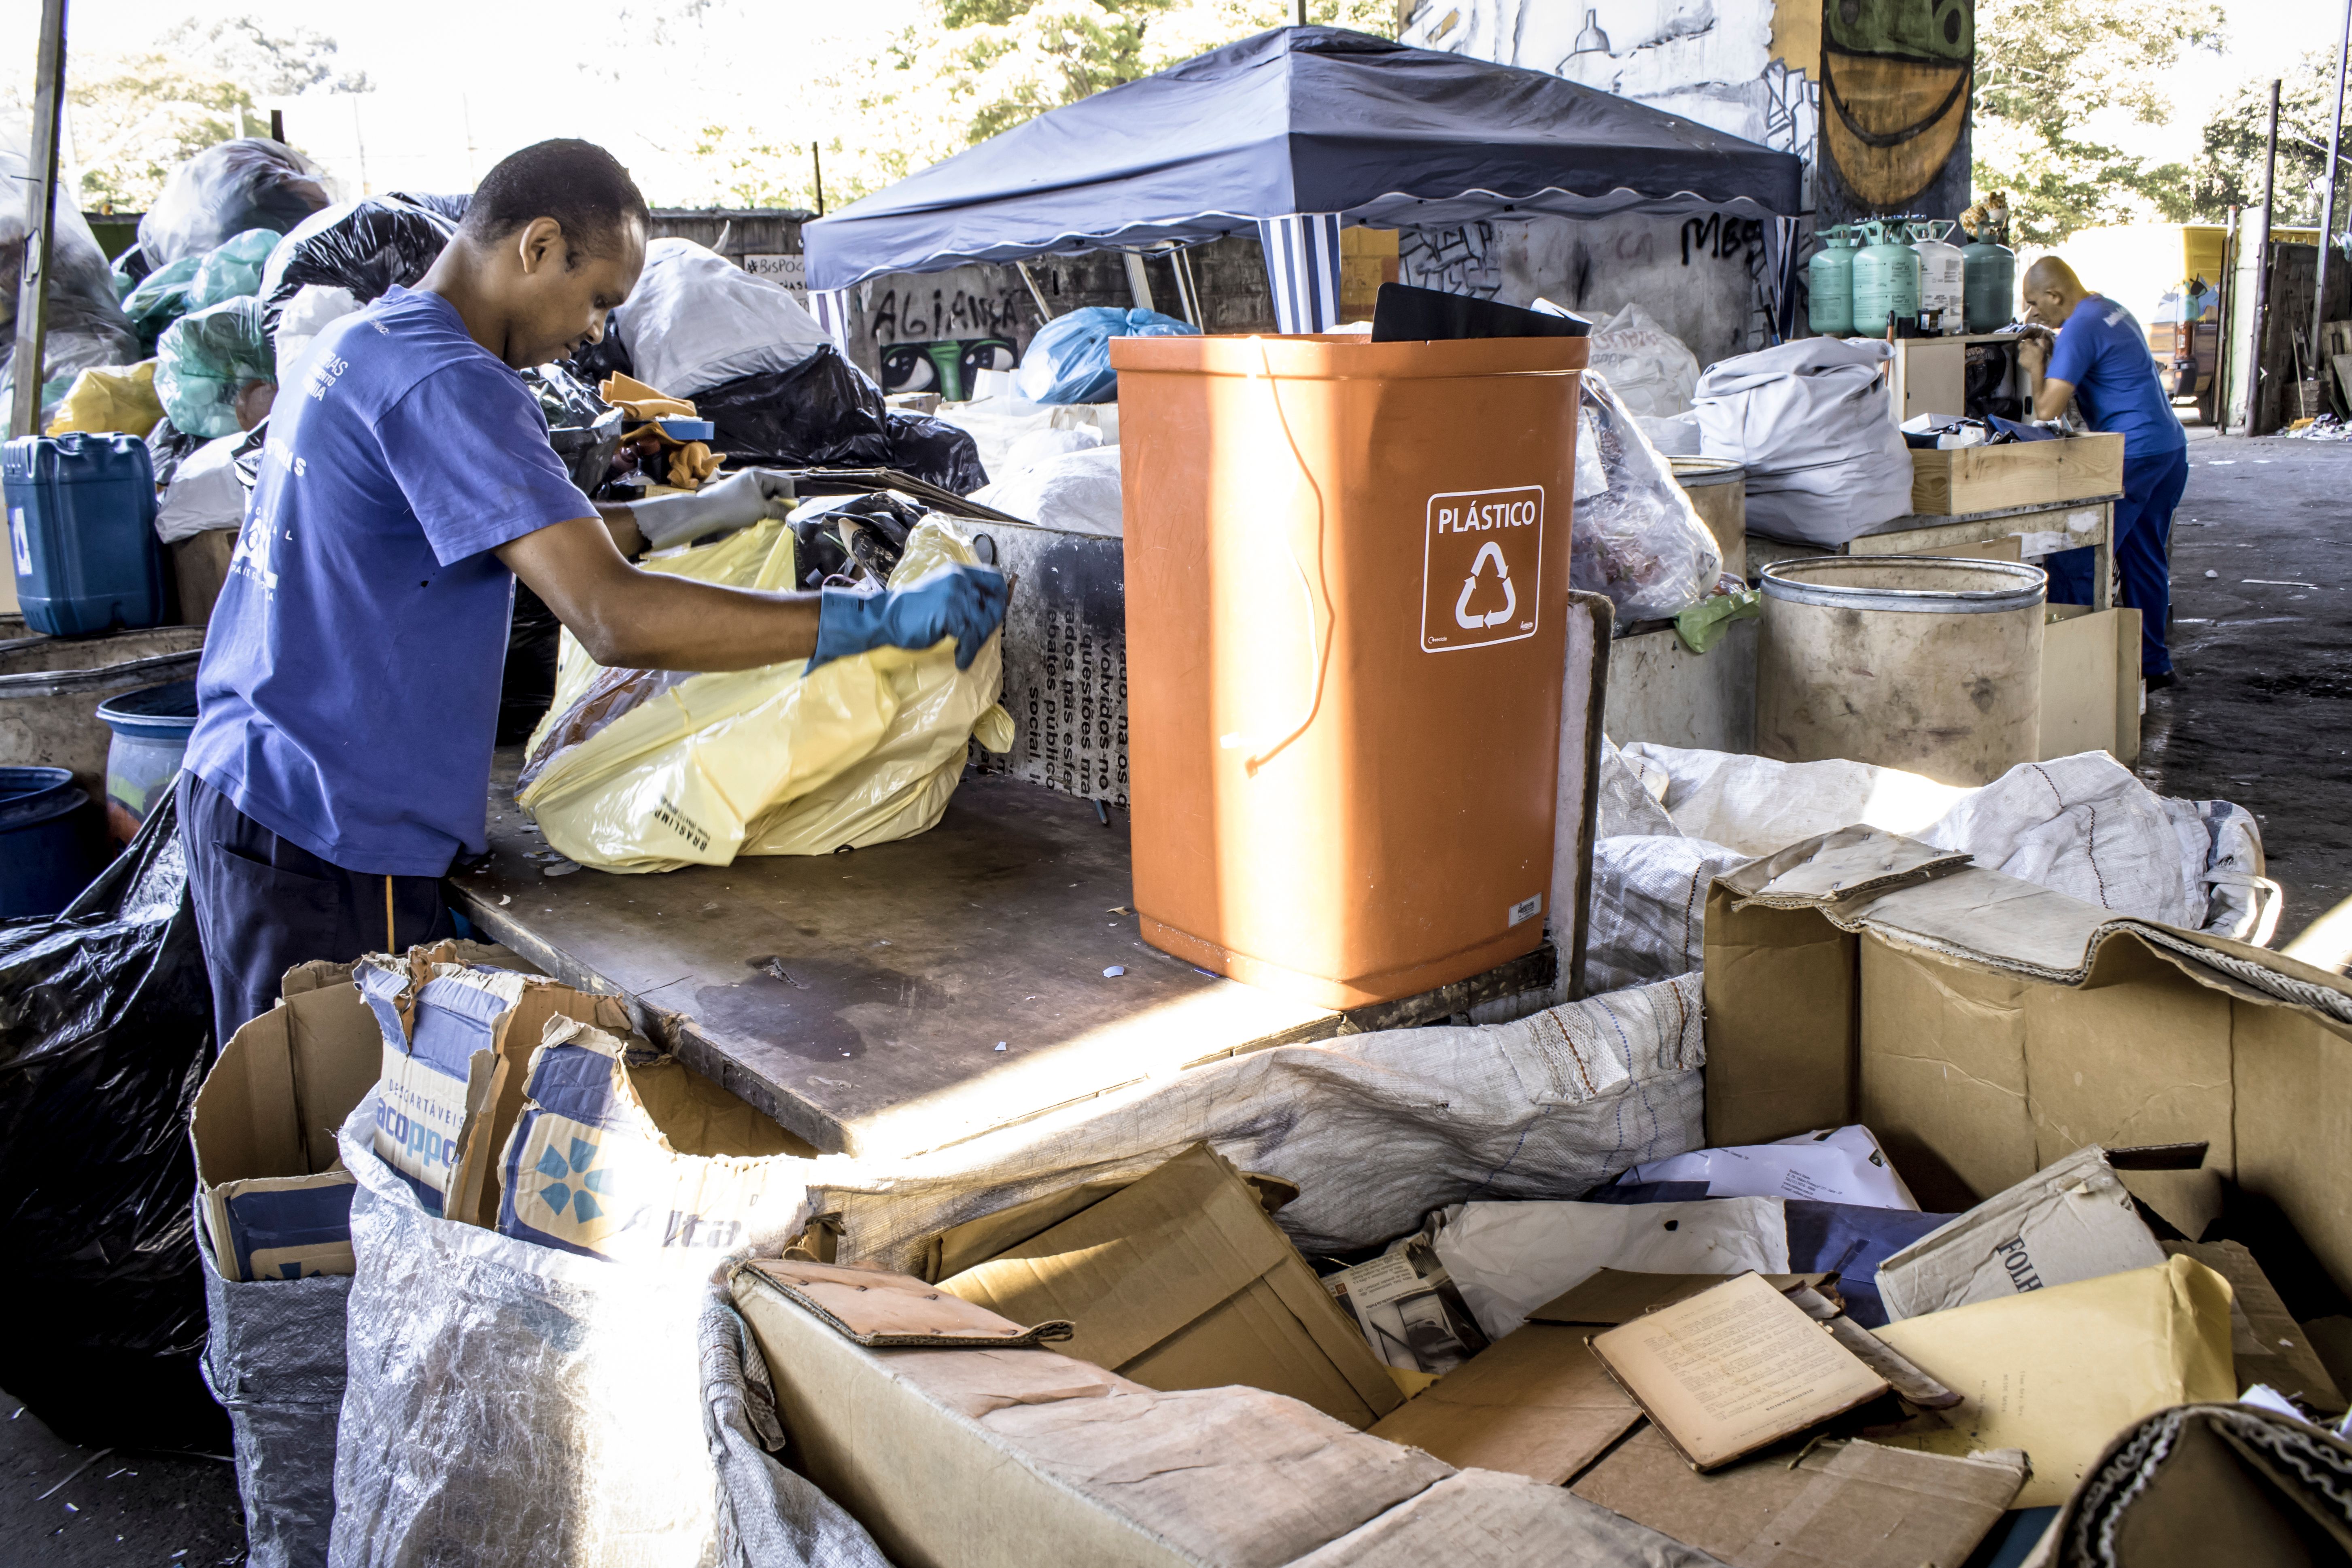 Workers from a waste picker cooperative stand at tables sorting waste.